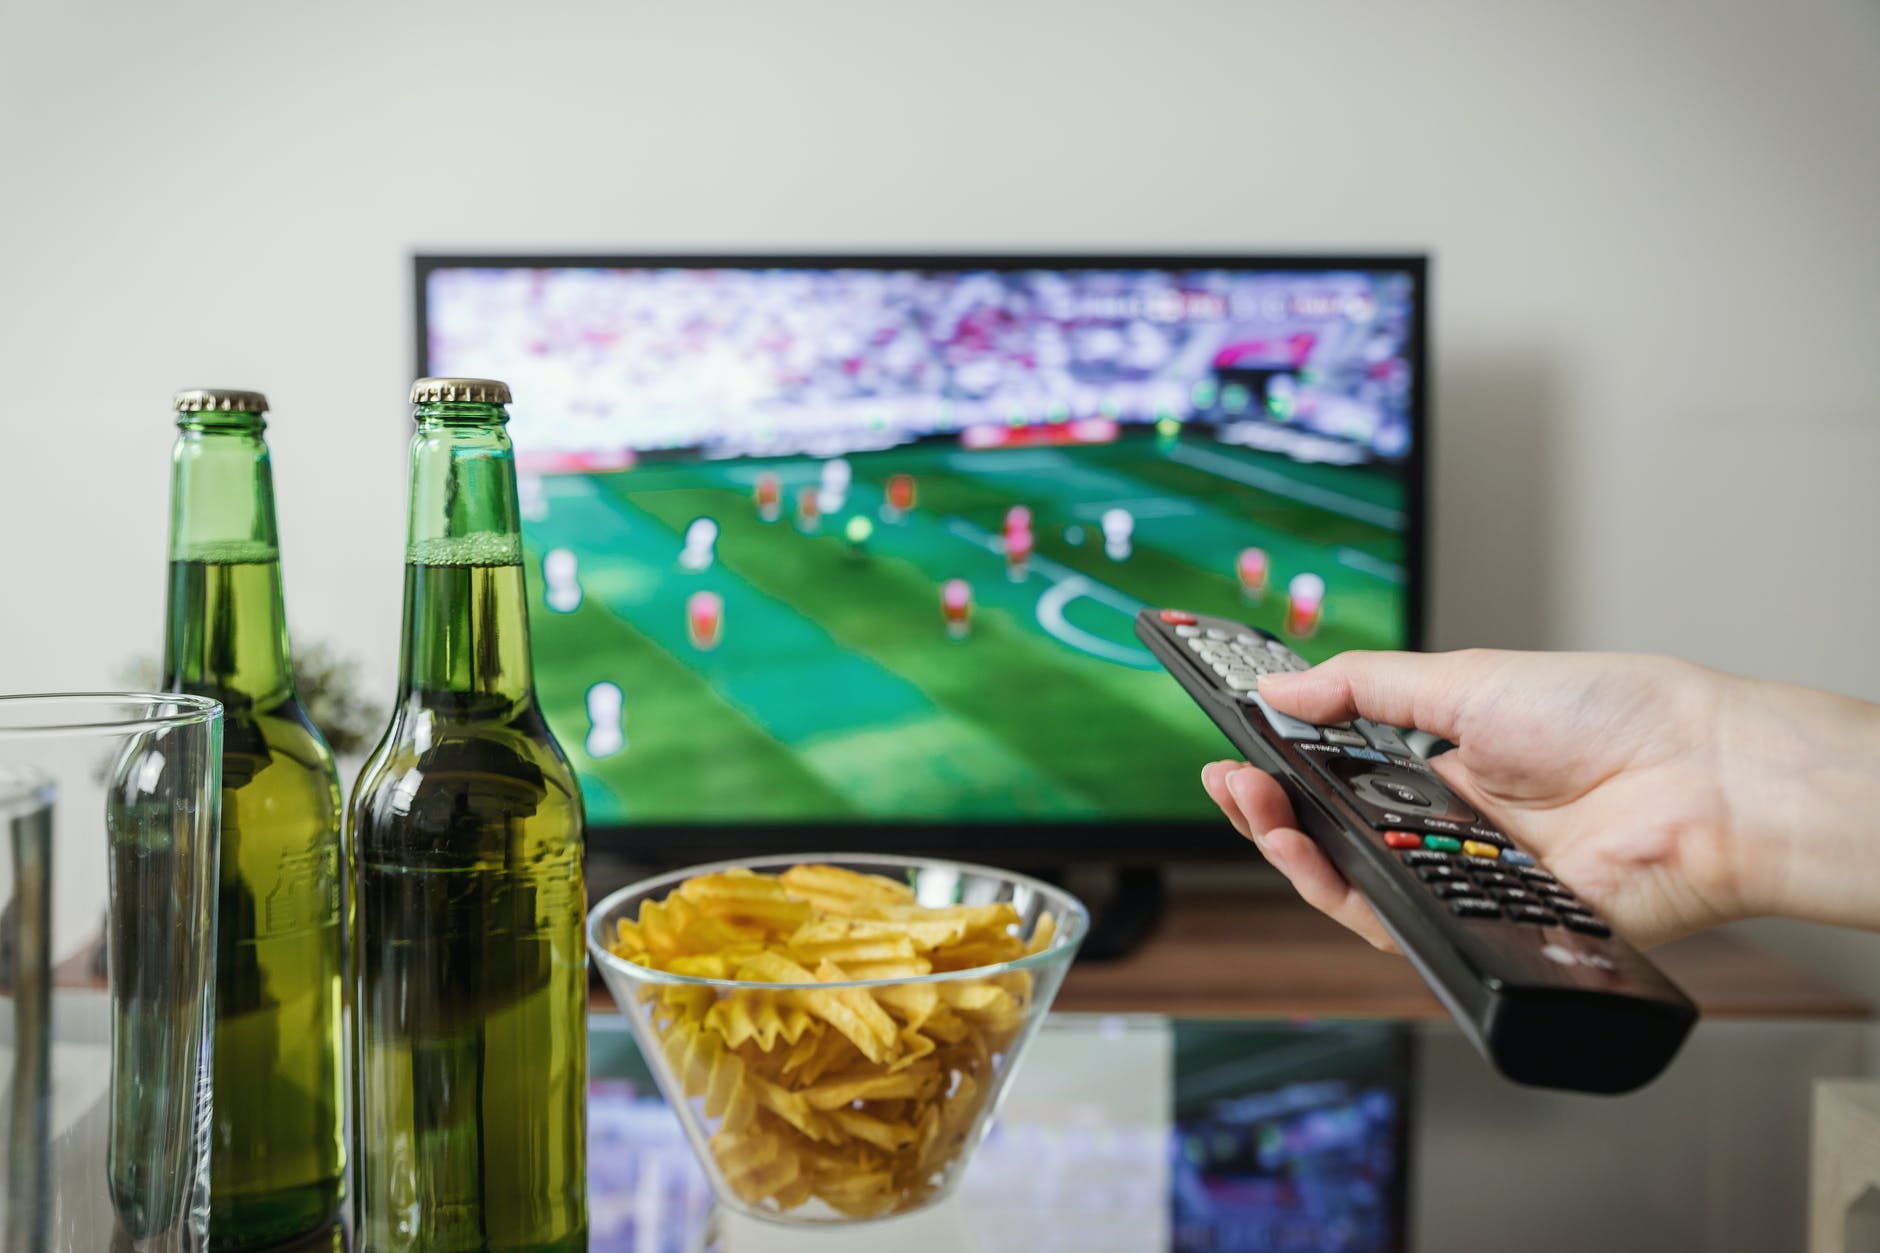 The fuboTV is a television streaming service that allows users to watch their favorite sports live shows even without a cable or satellite connection 